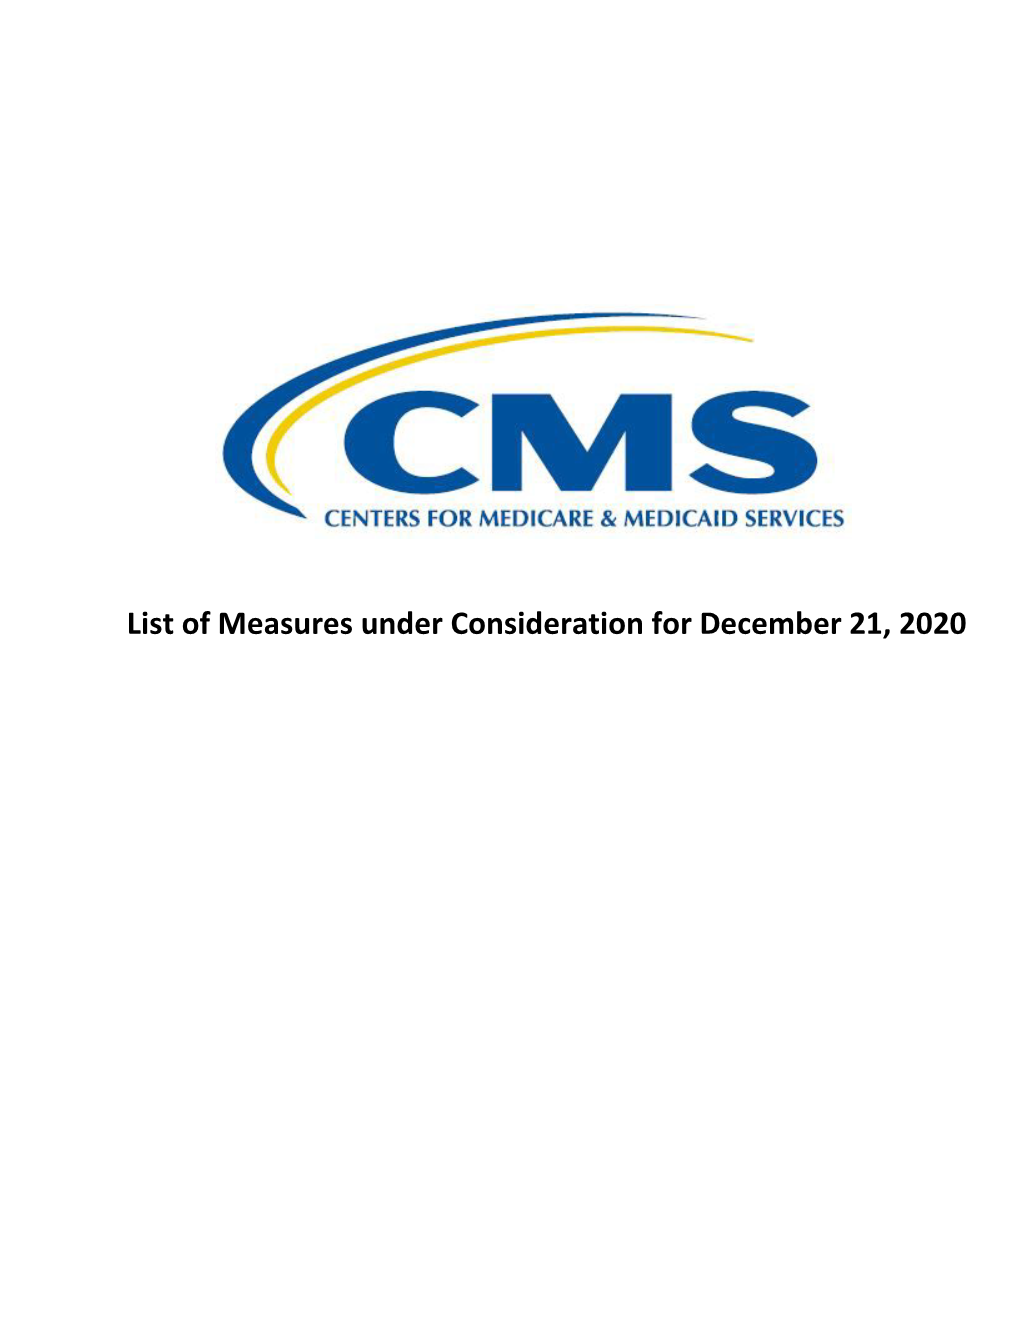 List of Measures Under Consideration for December 21, 2020